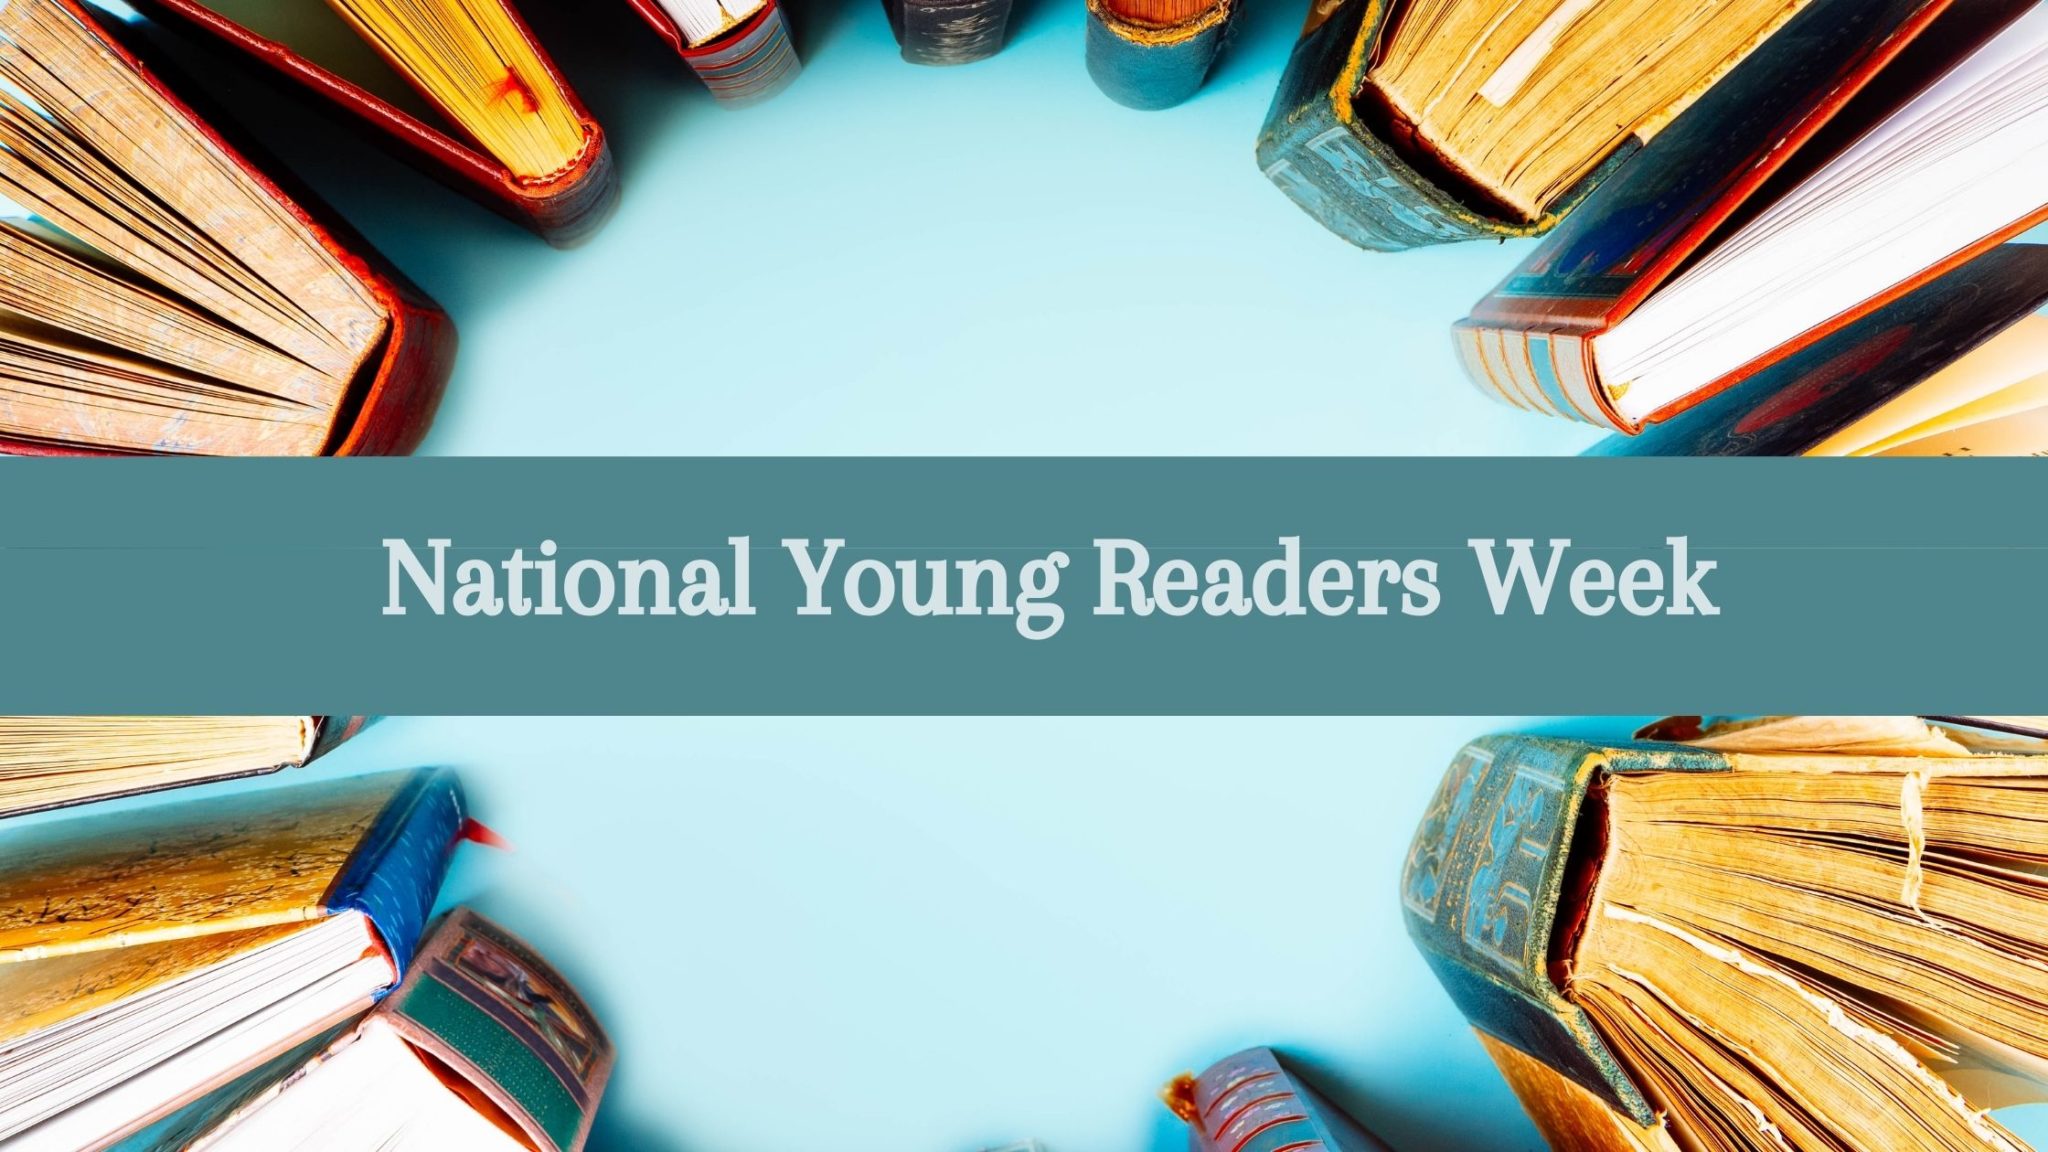 National Young Readers Week